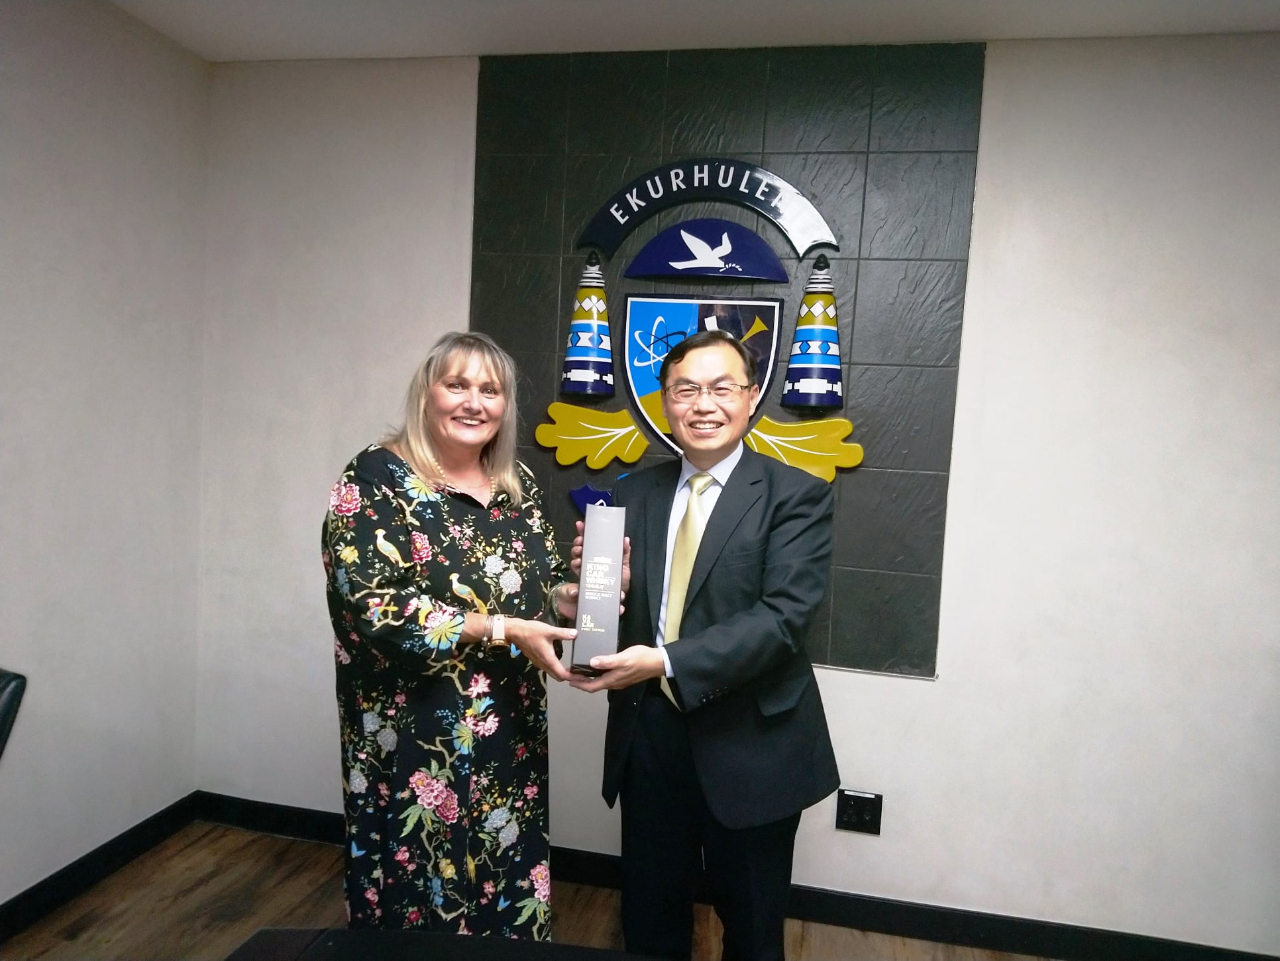 Representative Anthony Ho visited Ekurhuleni Civic Centre to congratulate his old friend Tania Campbell, who was recently elected as the Executive Mayor of Ekurhuleni, one of the largest metro municipalities in Gauteng. He presented Taiwanese tea and Kavalan and wished Mayor Campbell great success in her new position.